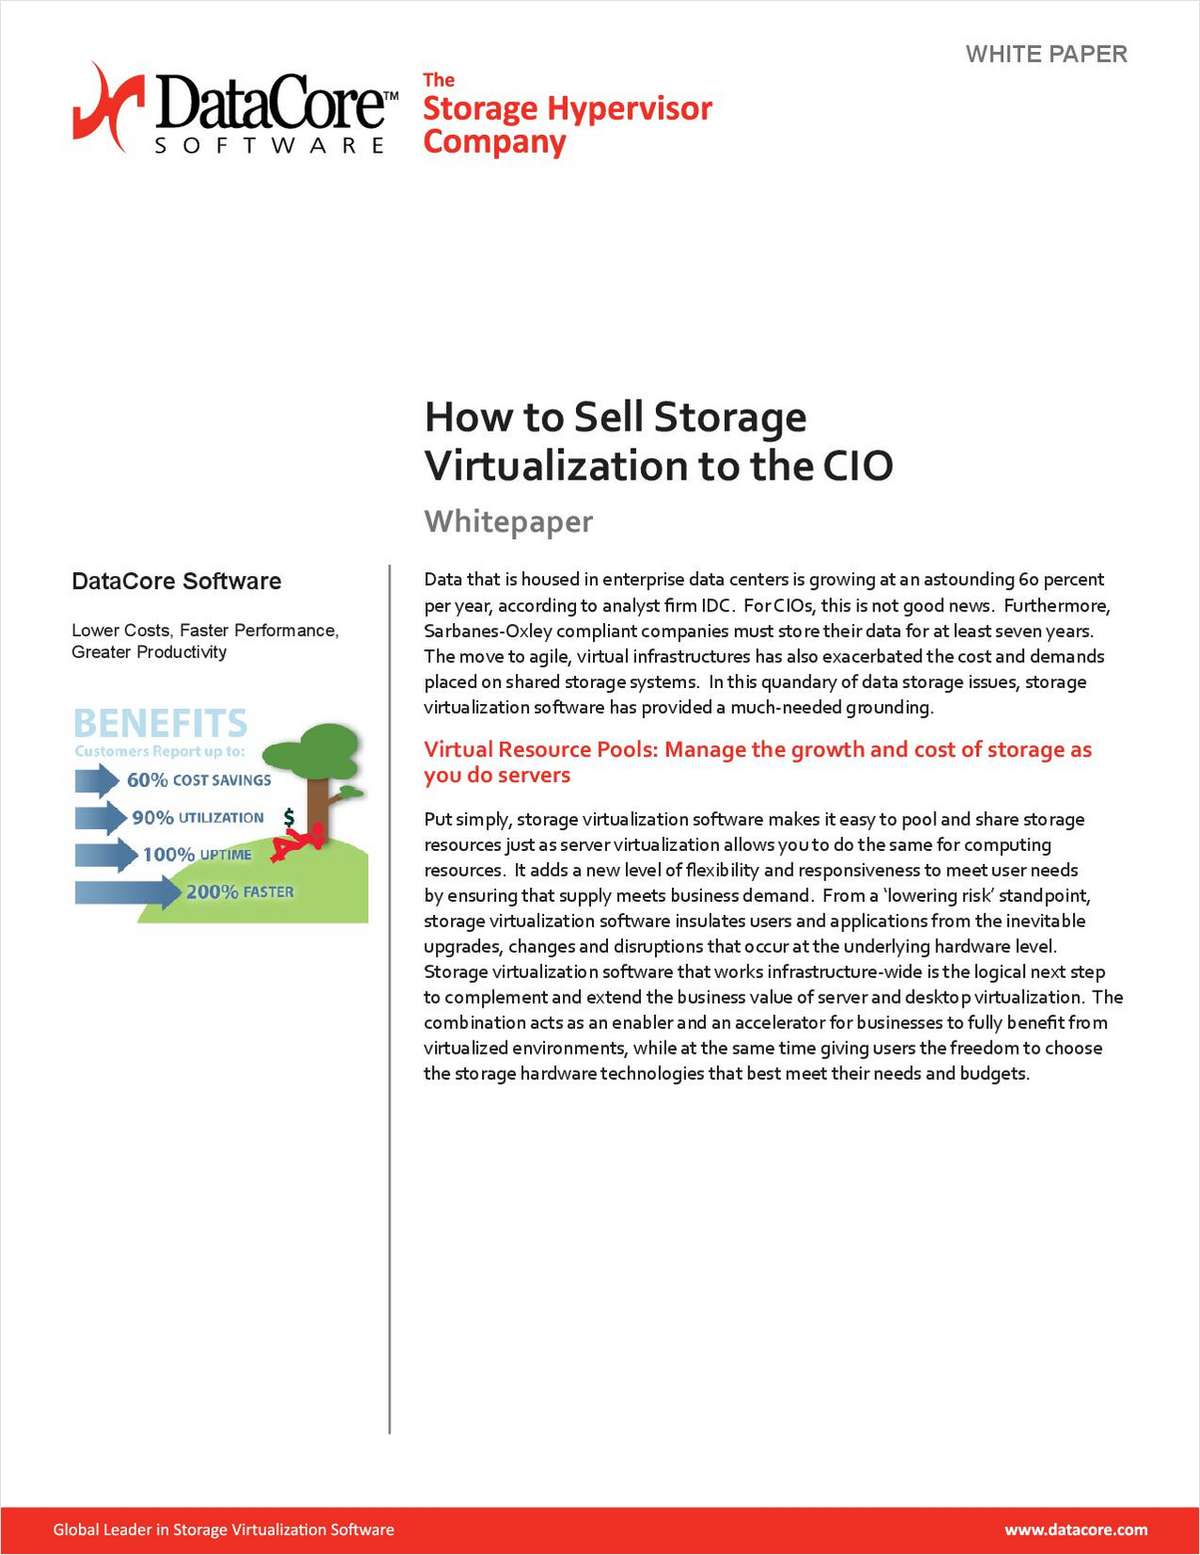 How to Sell Storage Virtualization to Your CIO